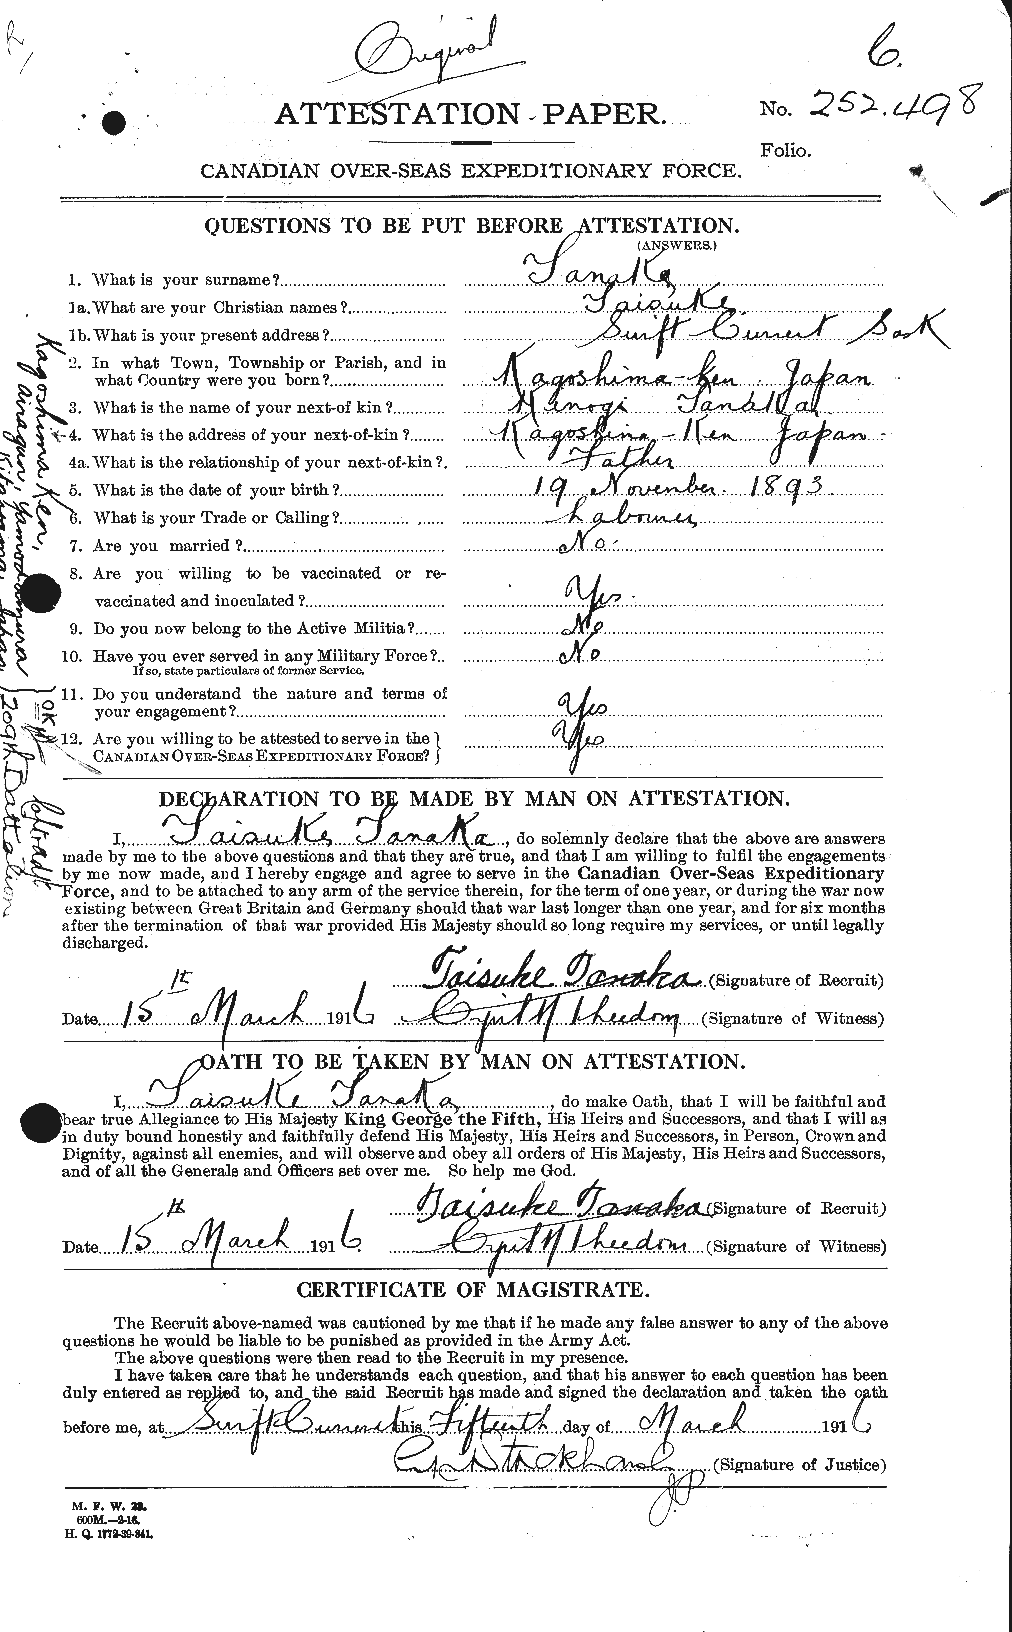 Personnel Records of the First World War - CEF 625432a